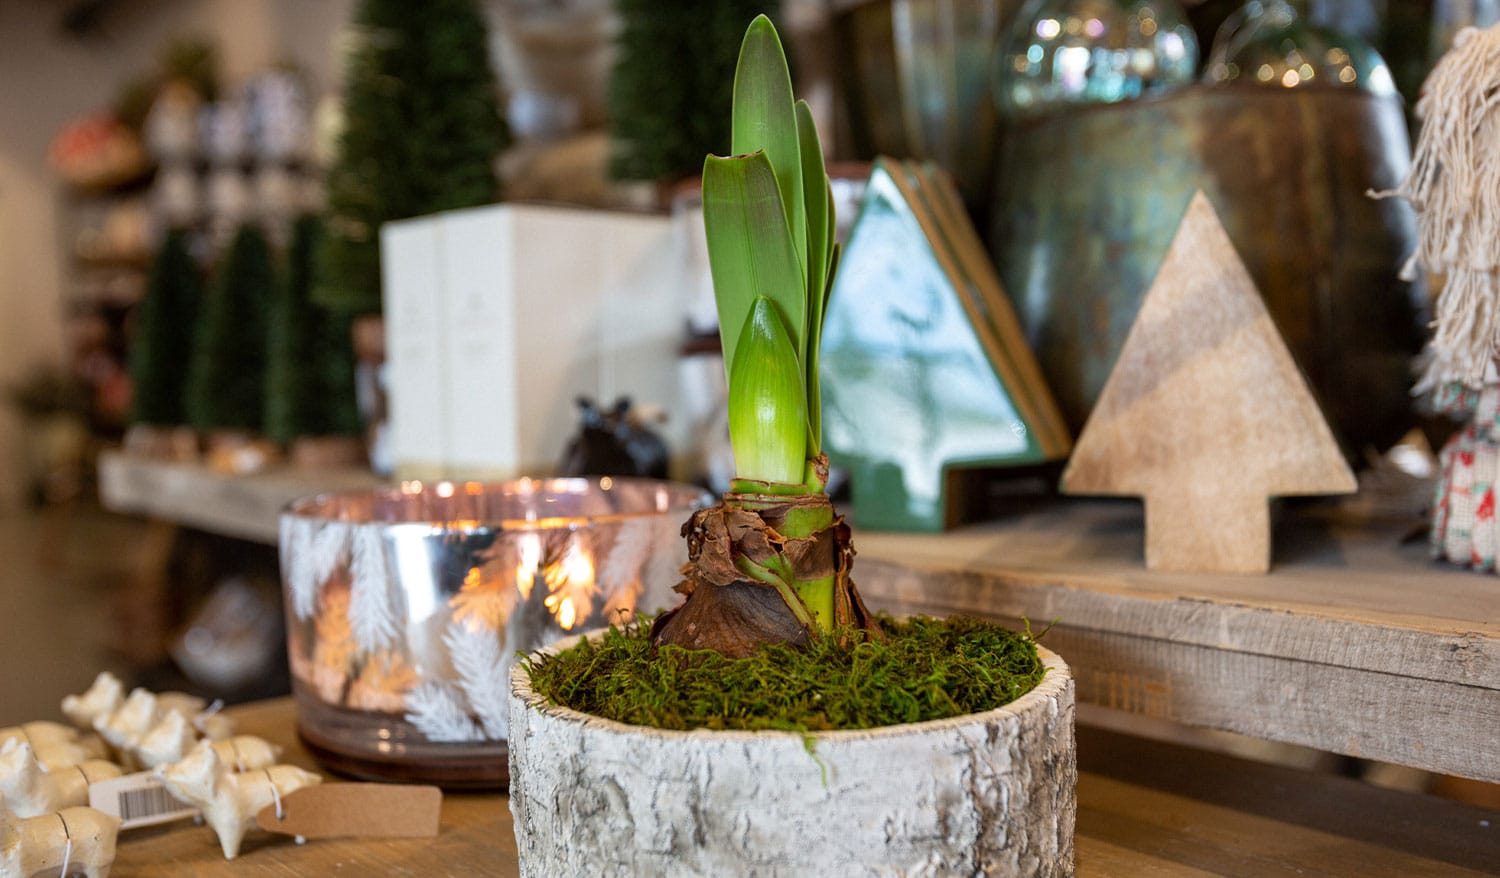 Amaryllis in a pot with a wooden texture